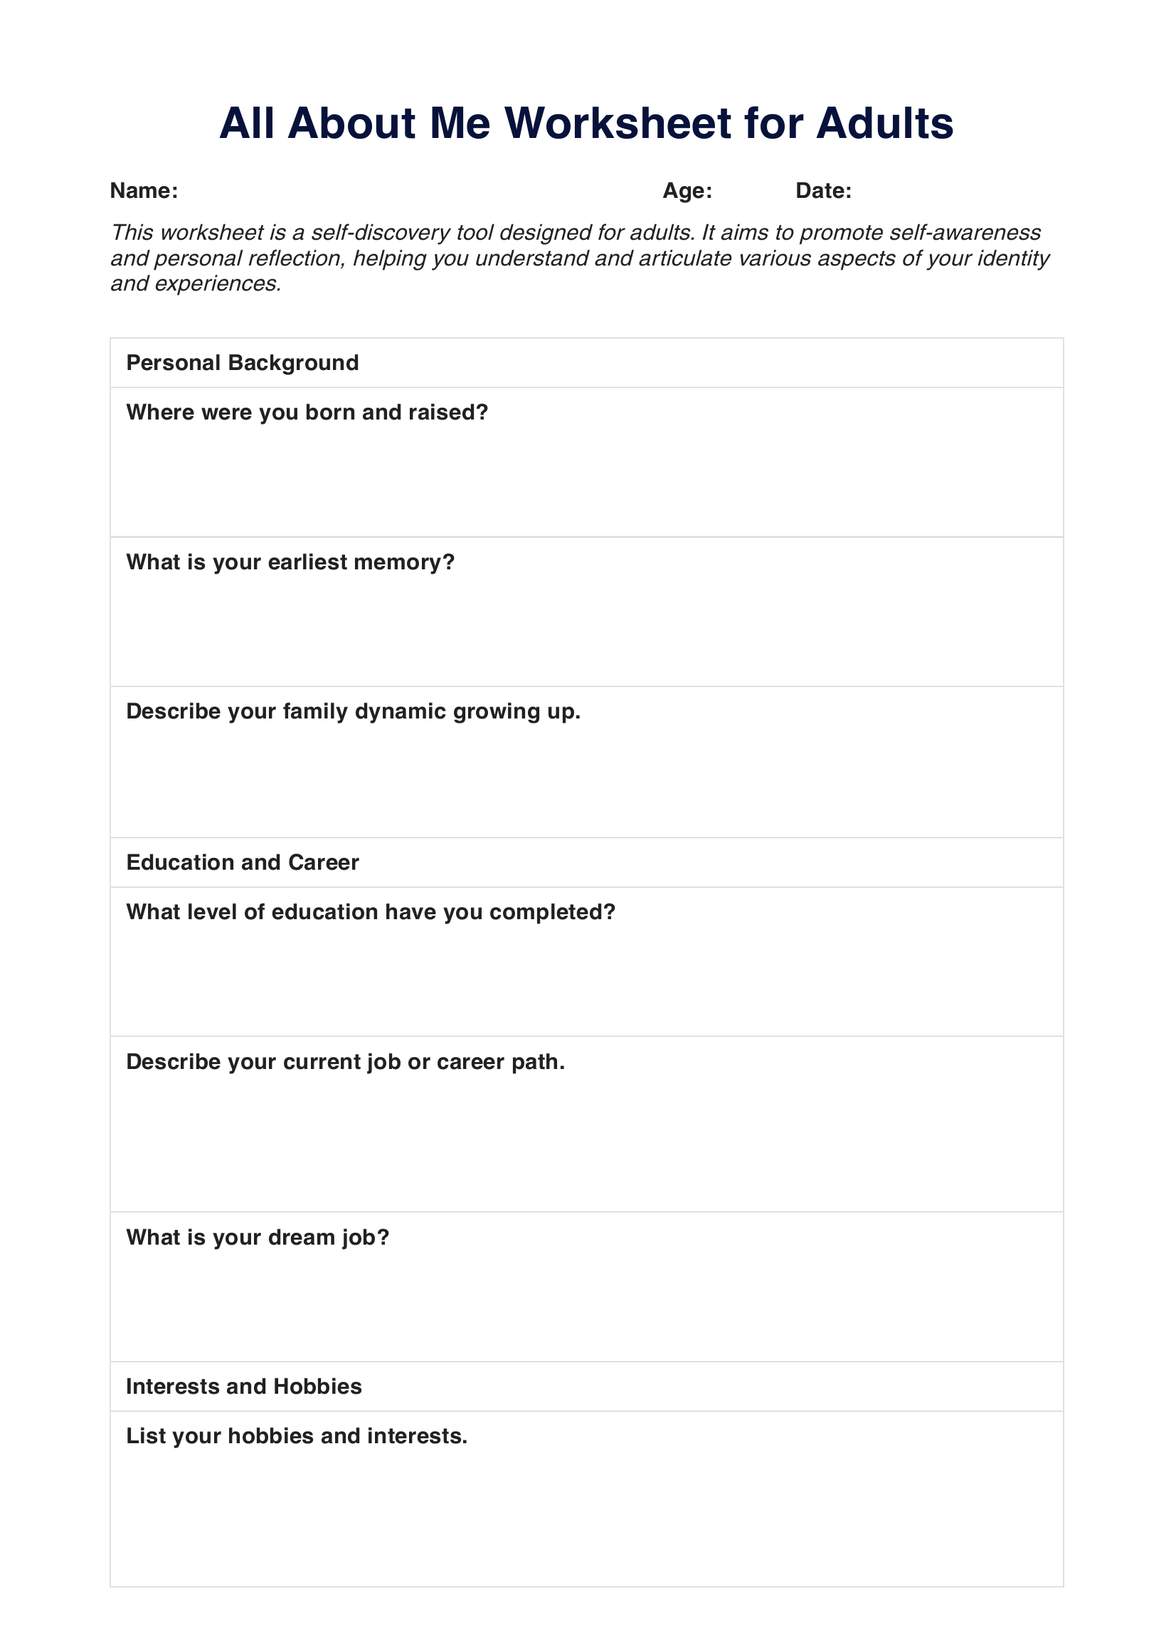 All About Me Worksheet for Adults PDF Example